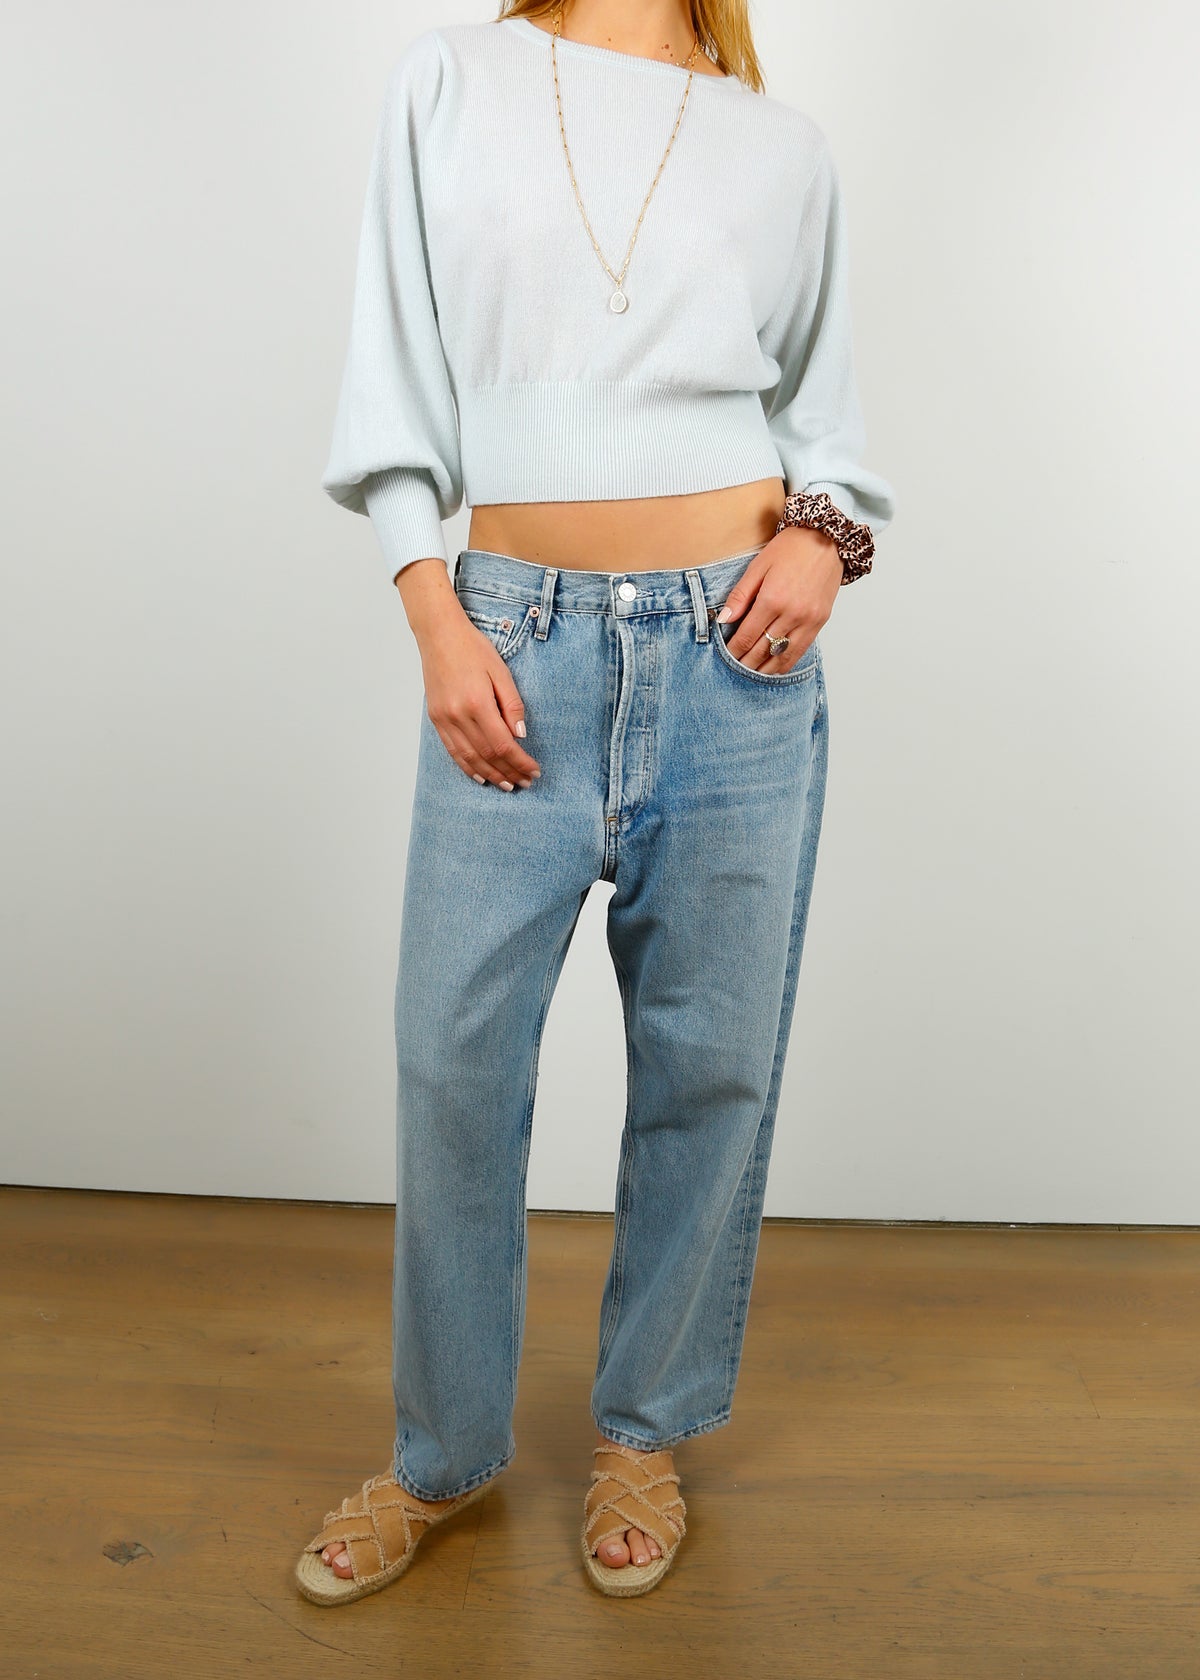 AGOLDE 90's Crop Pant in Replica Washed Indigo